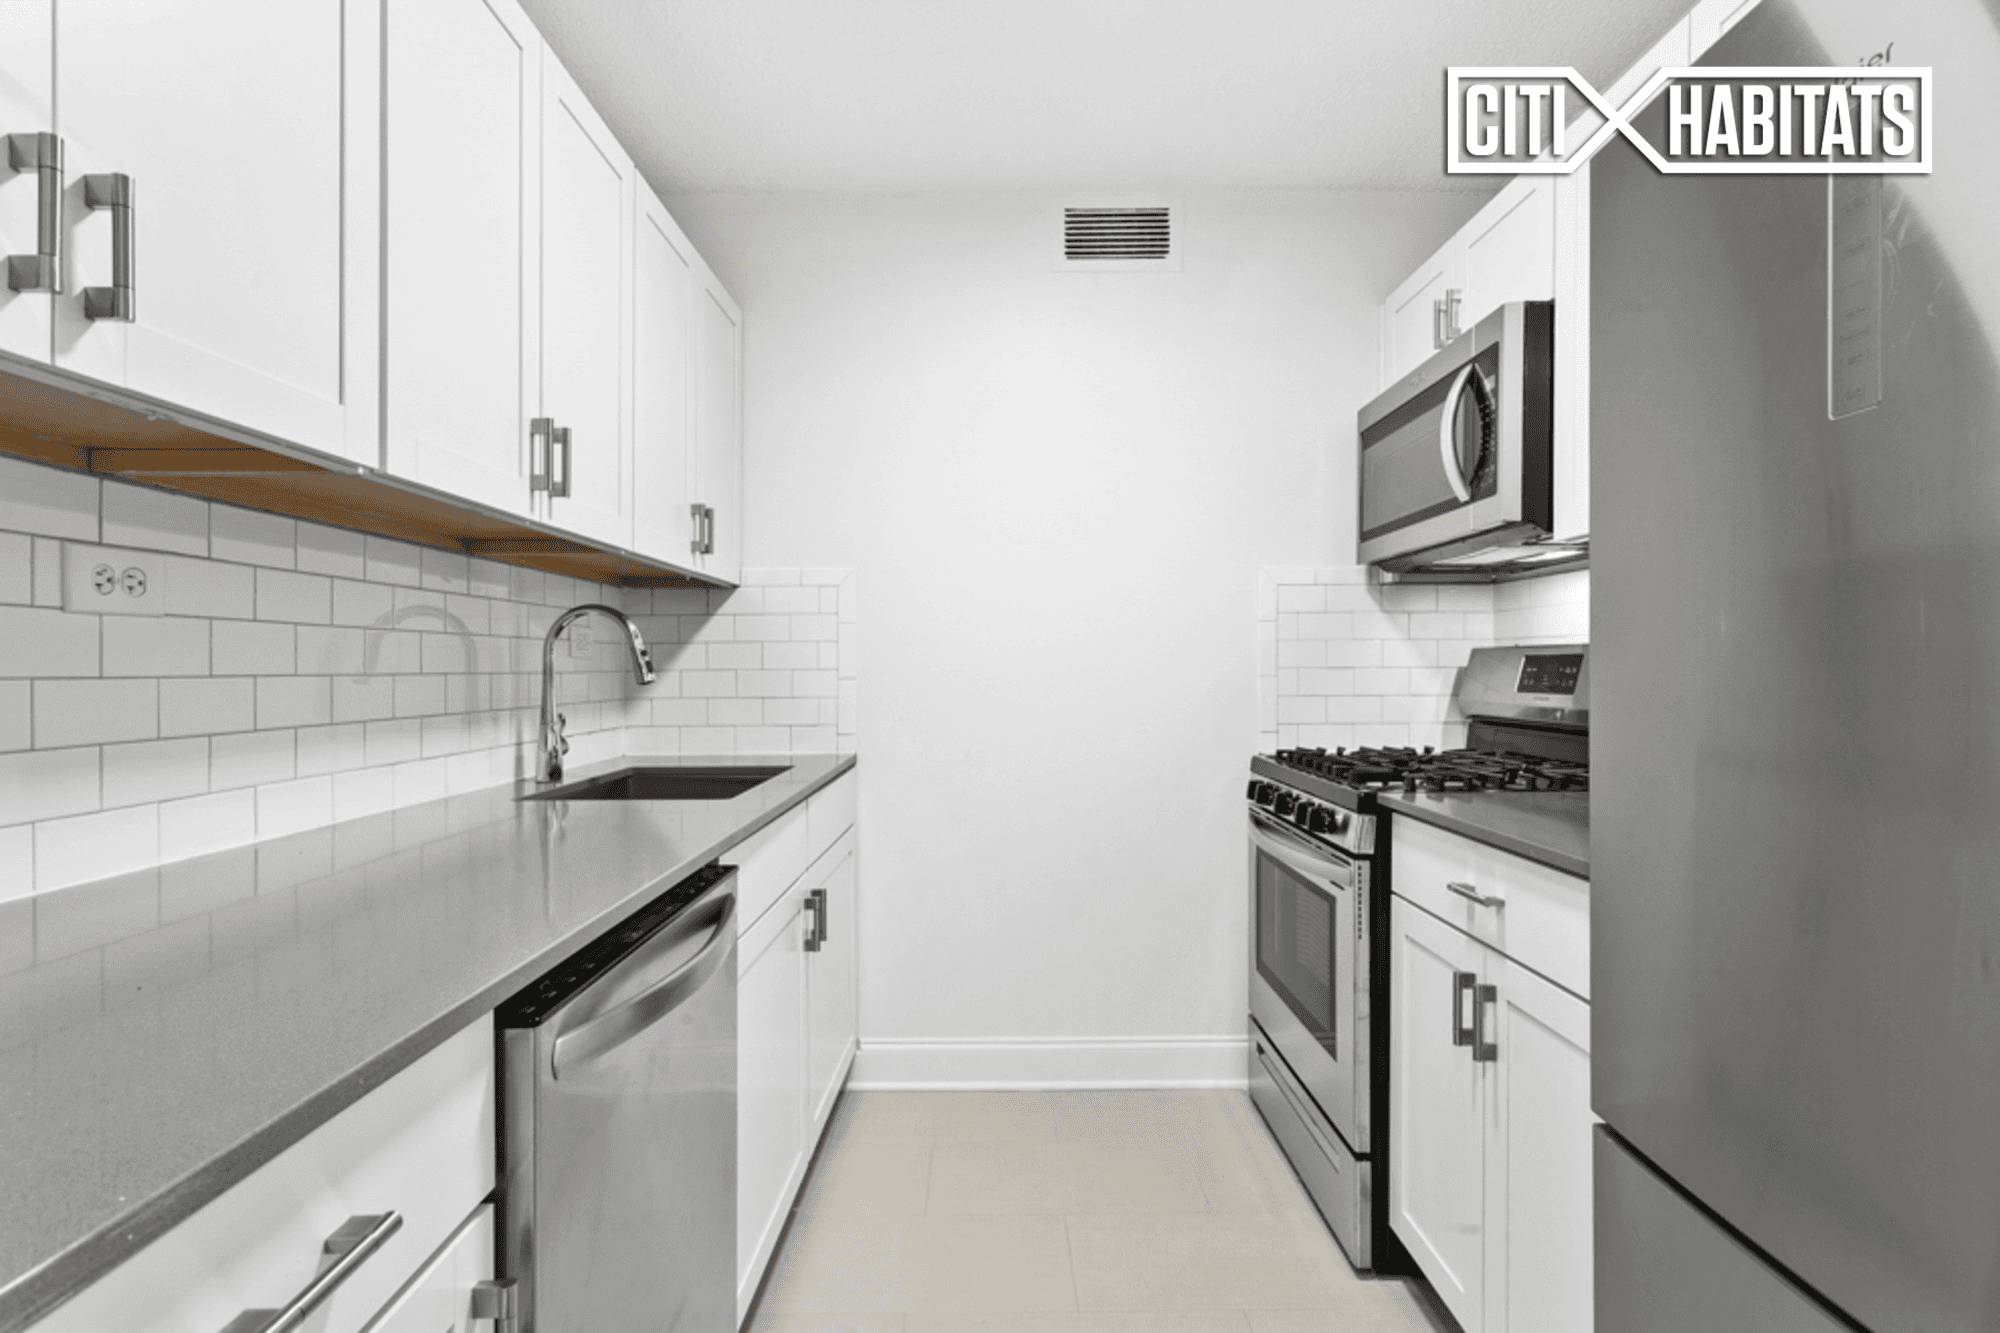 Limited Time Offer No Broker Fee and 1 Month FreeHigh Floor 2 BR 1Bath with Balcony NYC Skyline ViewsGetting to lower Manhattan from this spacious Two Bedroom One Bathroom apartment ...